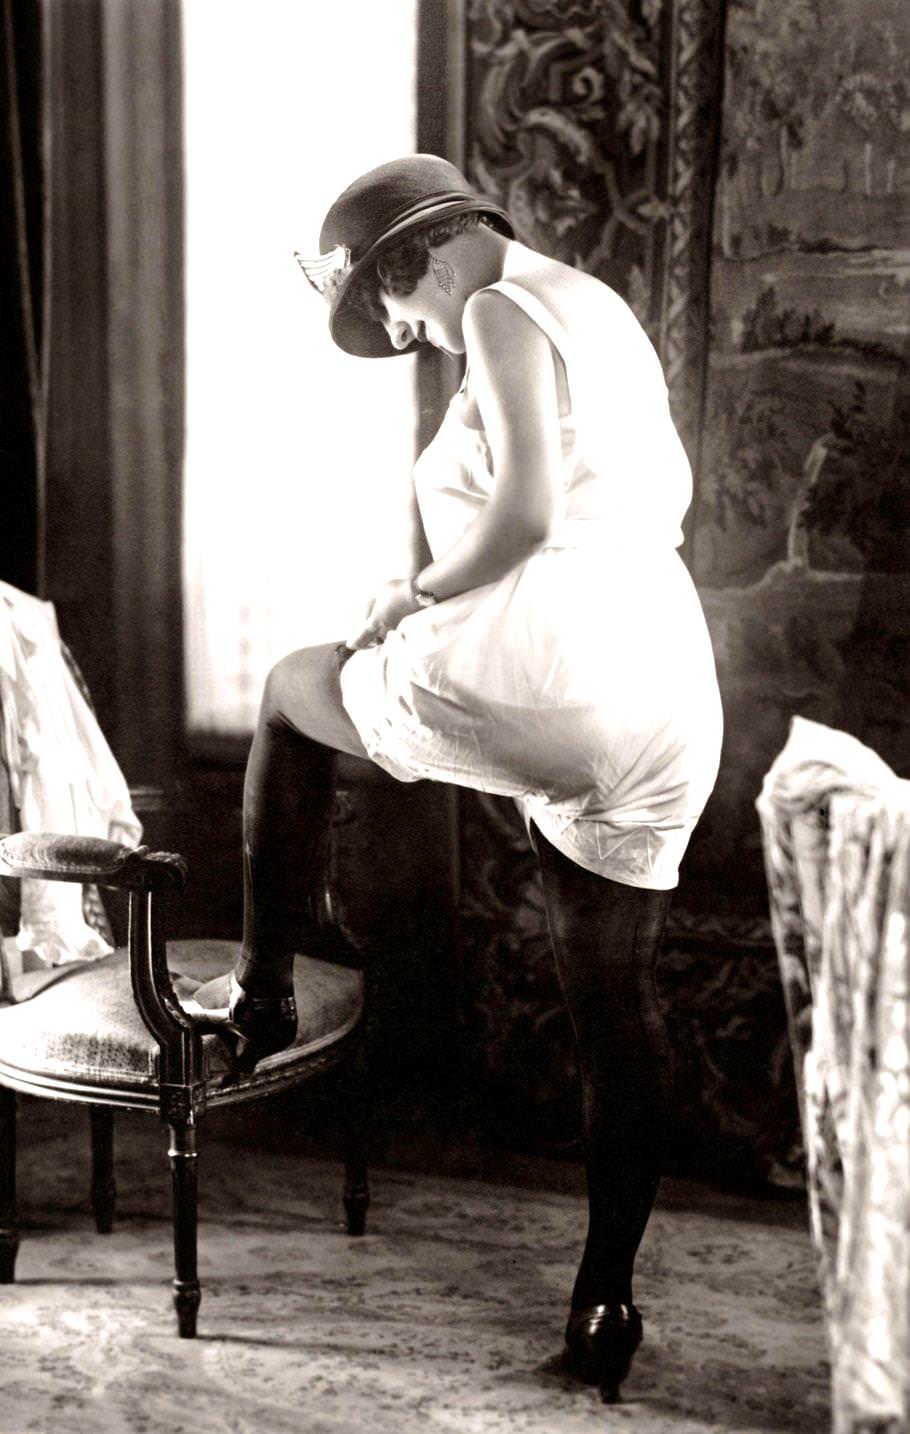 A young woman fastening her stockings and wearing a loose fitting 'step-in' chemise undergarment and a cloche style hat, Paris, 1920.